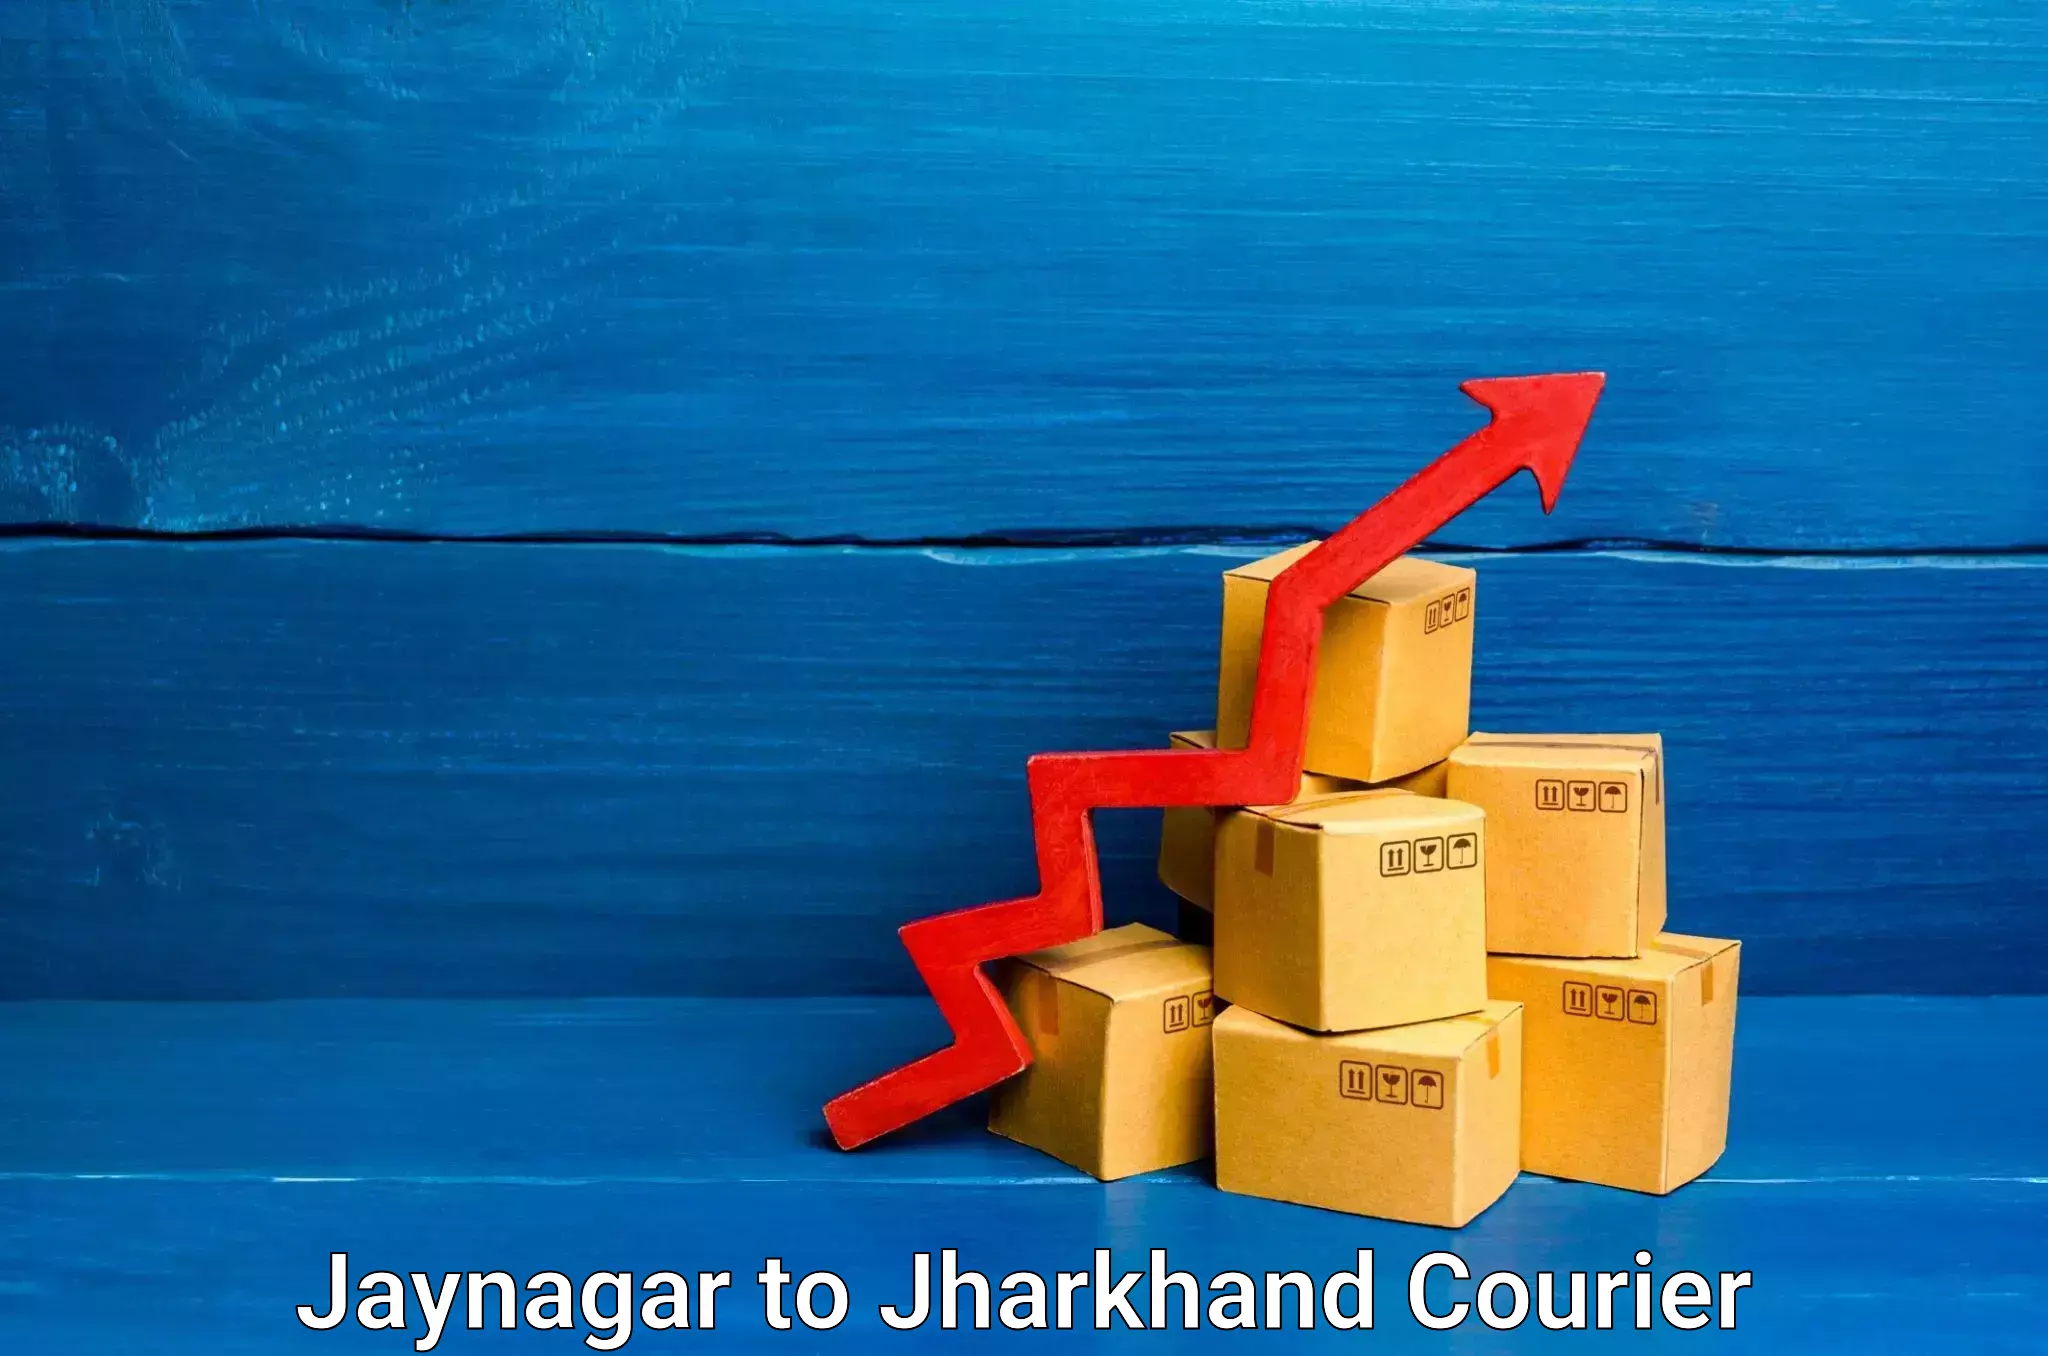 Quality moving and storage in Jaynagar to Musabani